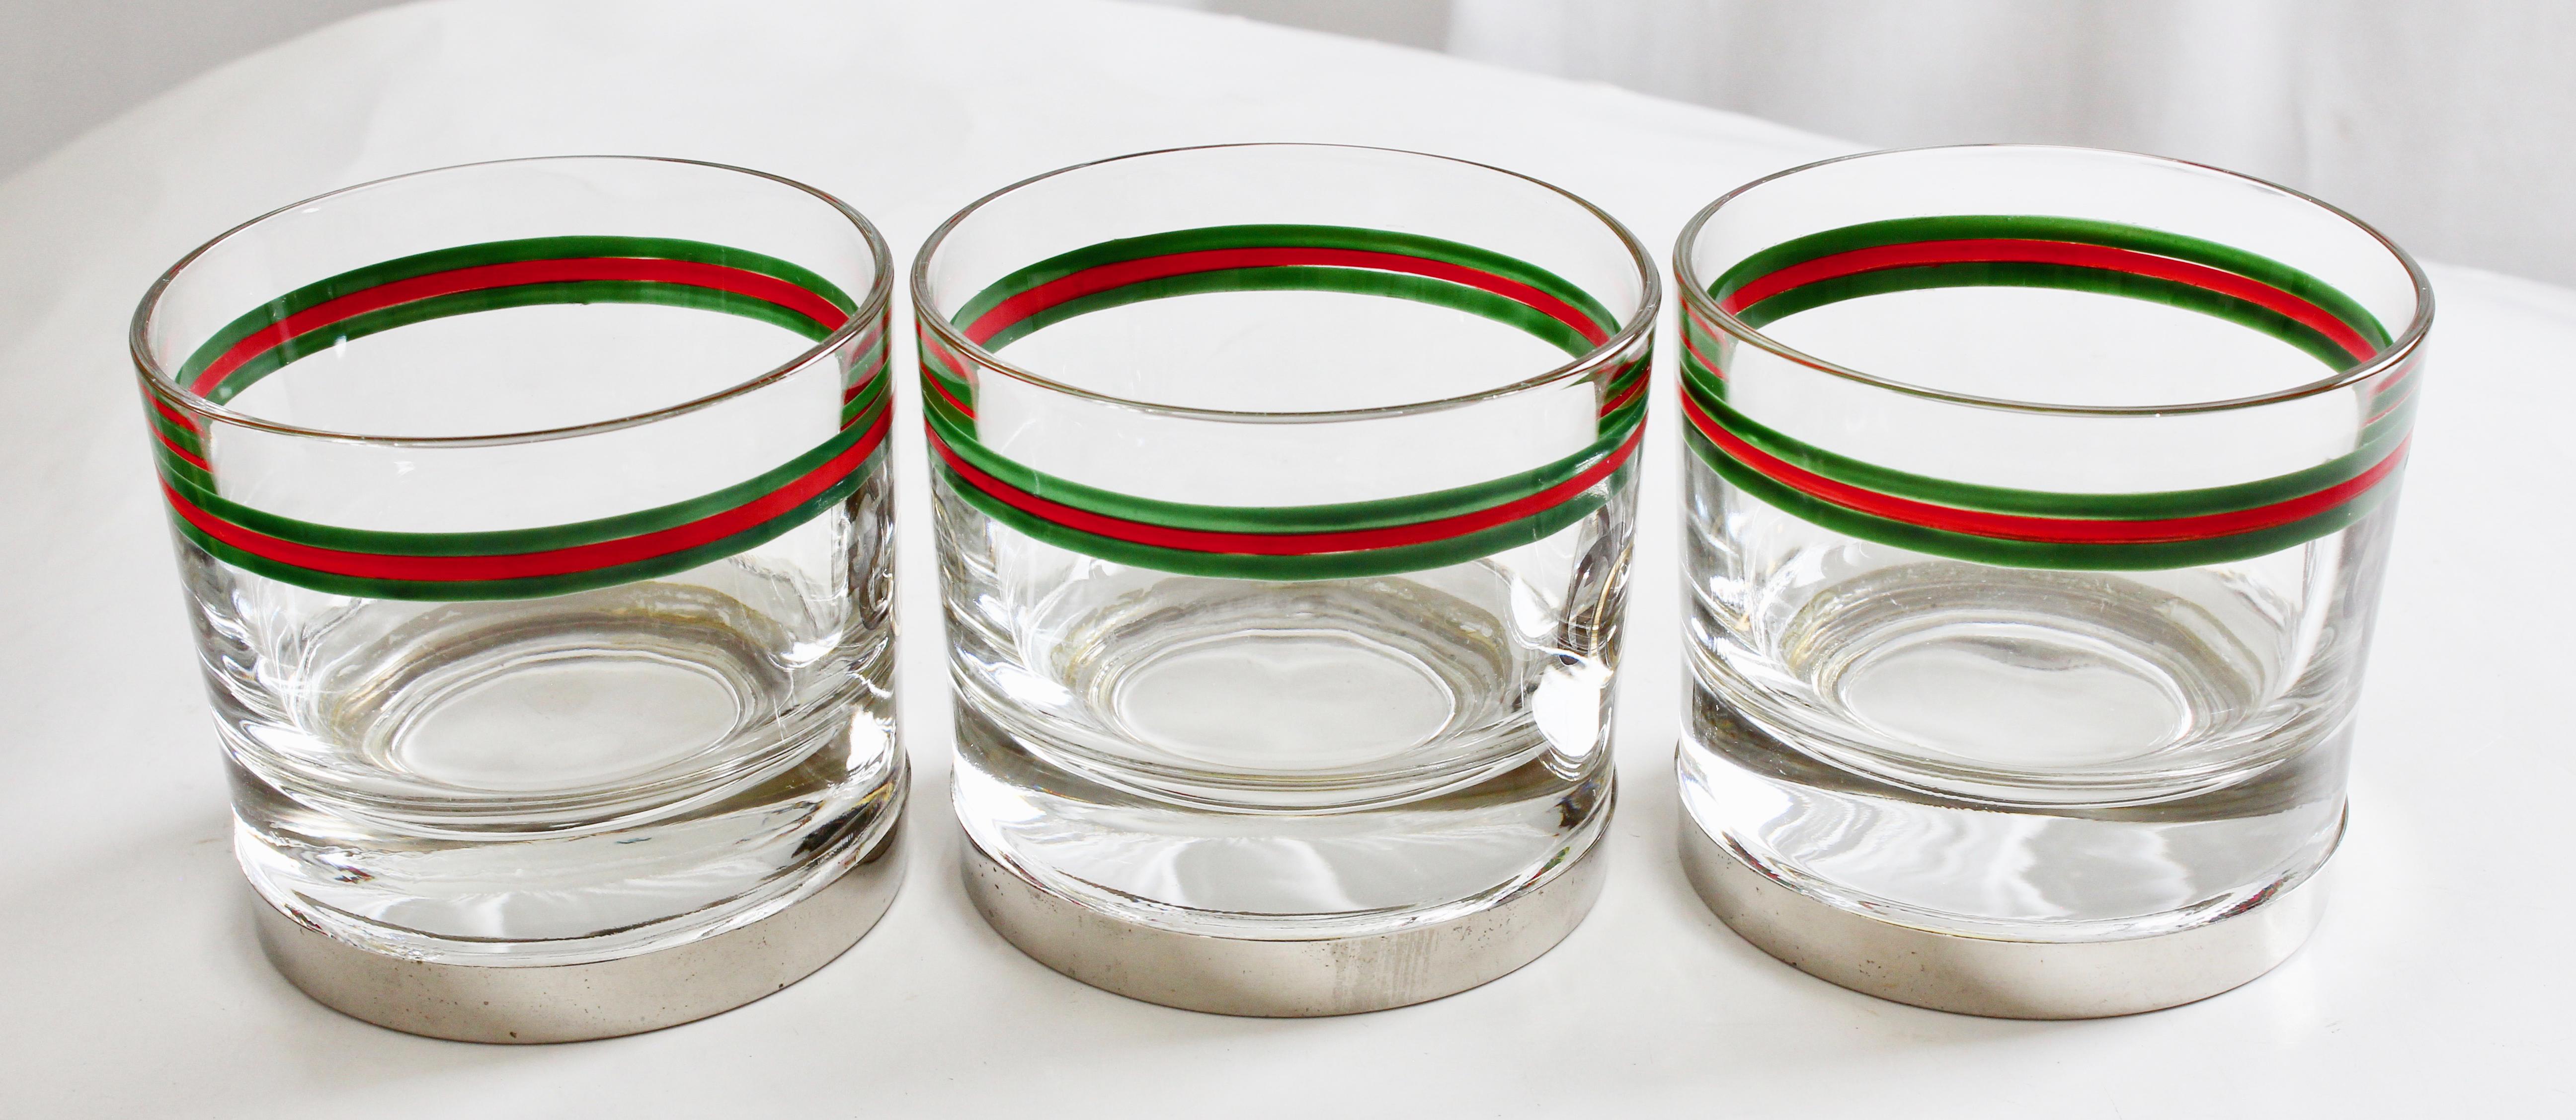 Women's or Men's Rare Gucci Cocktail Glasses Barware Set of 3 with Silver Base Vintage 70s 